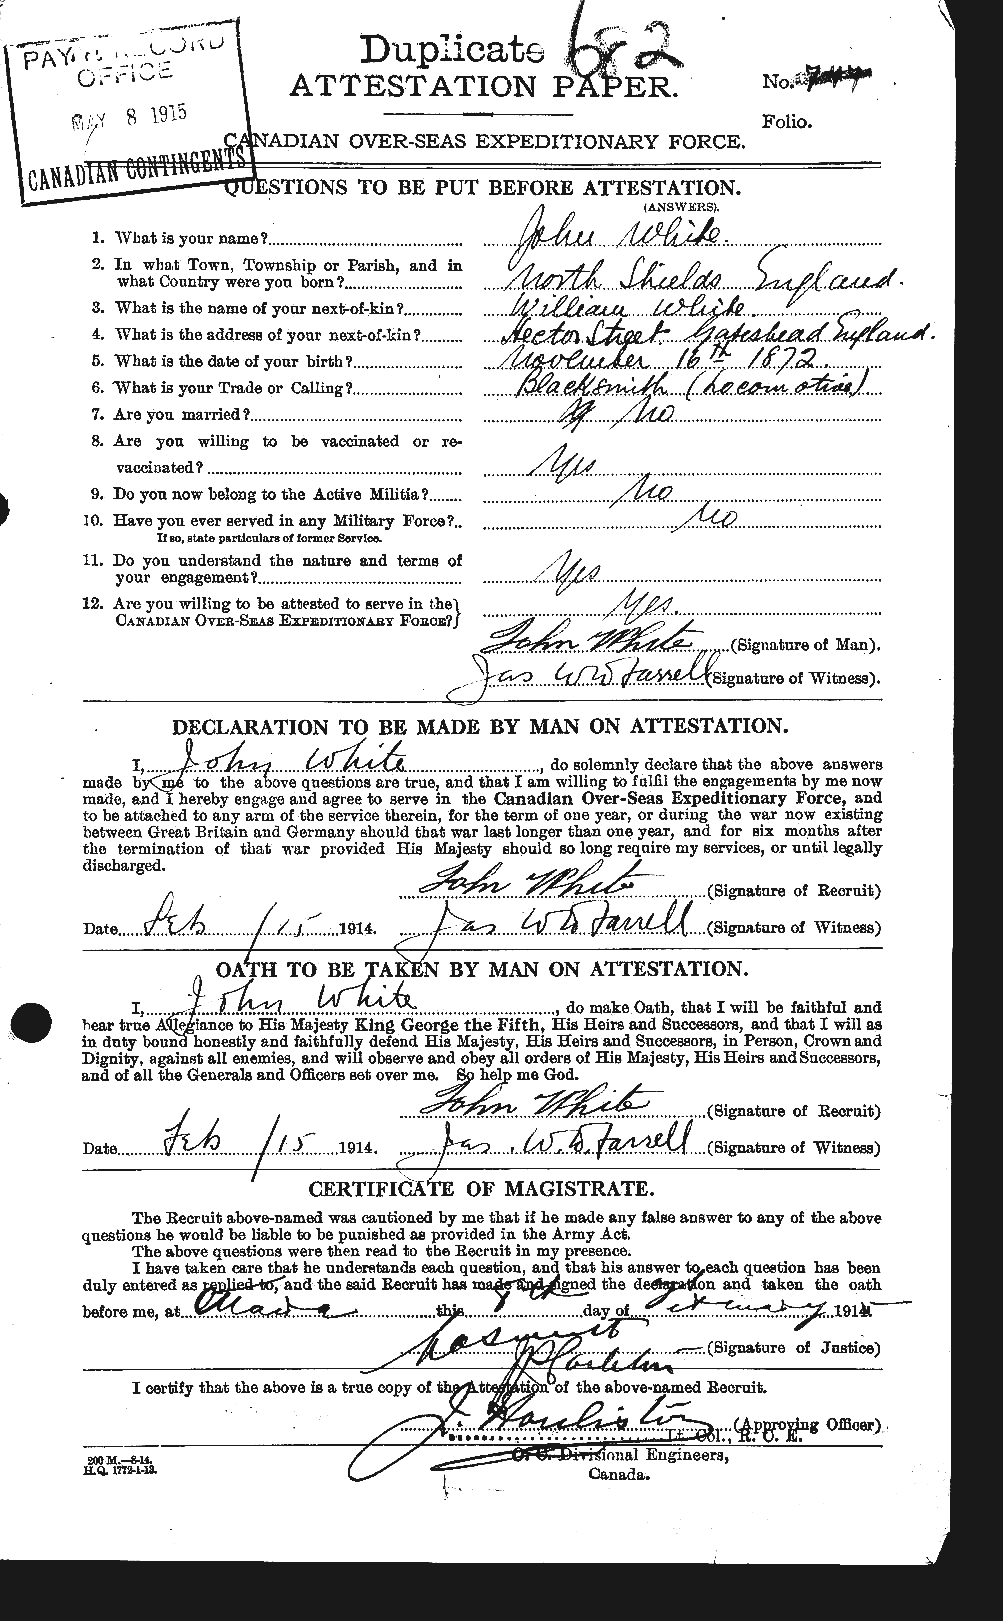 Personnel Records of the First World War - CEF 671495a